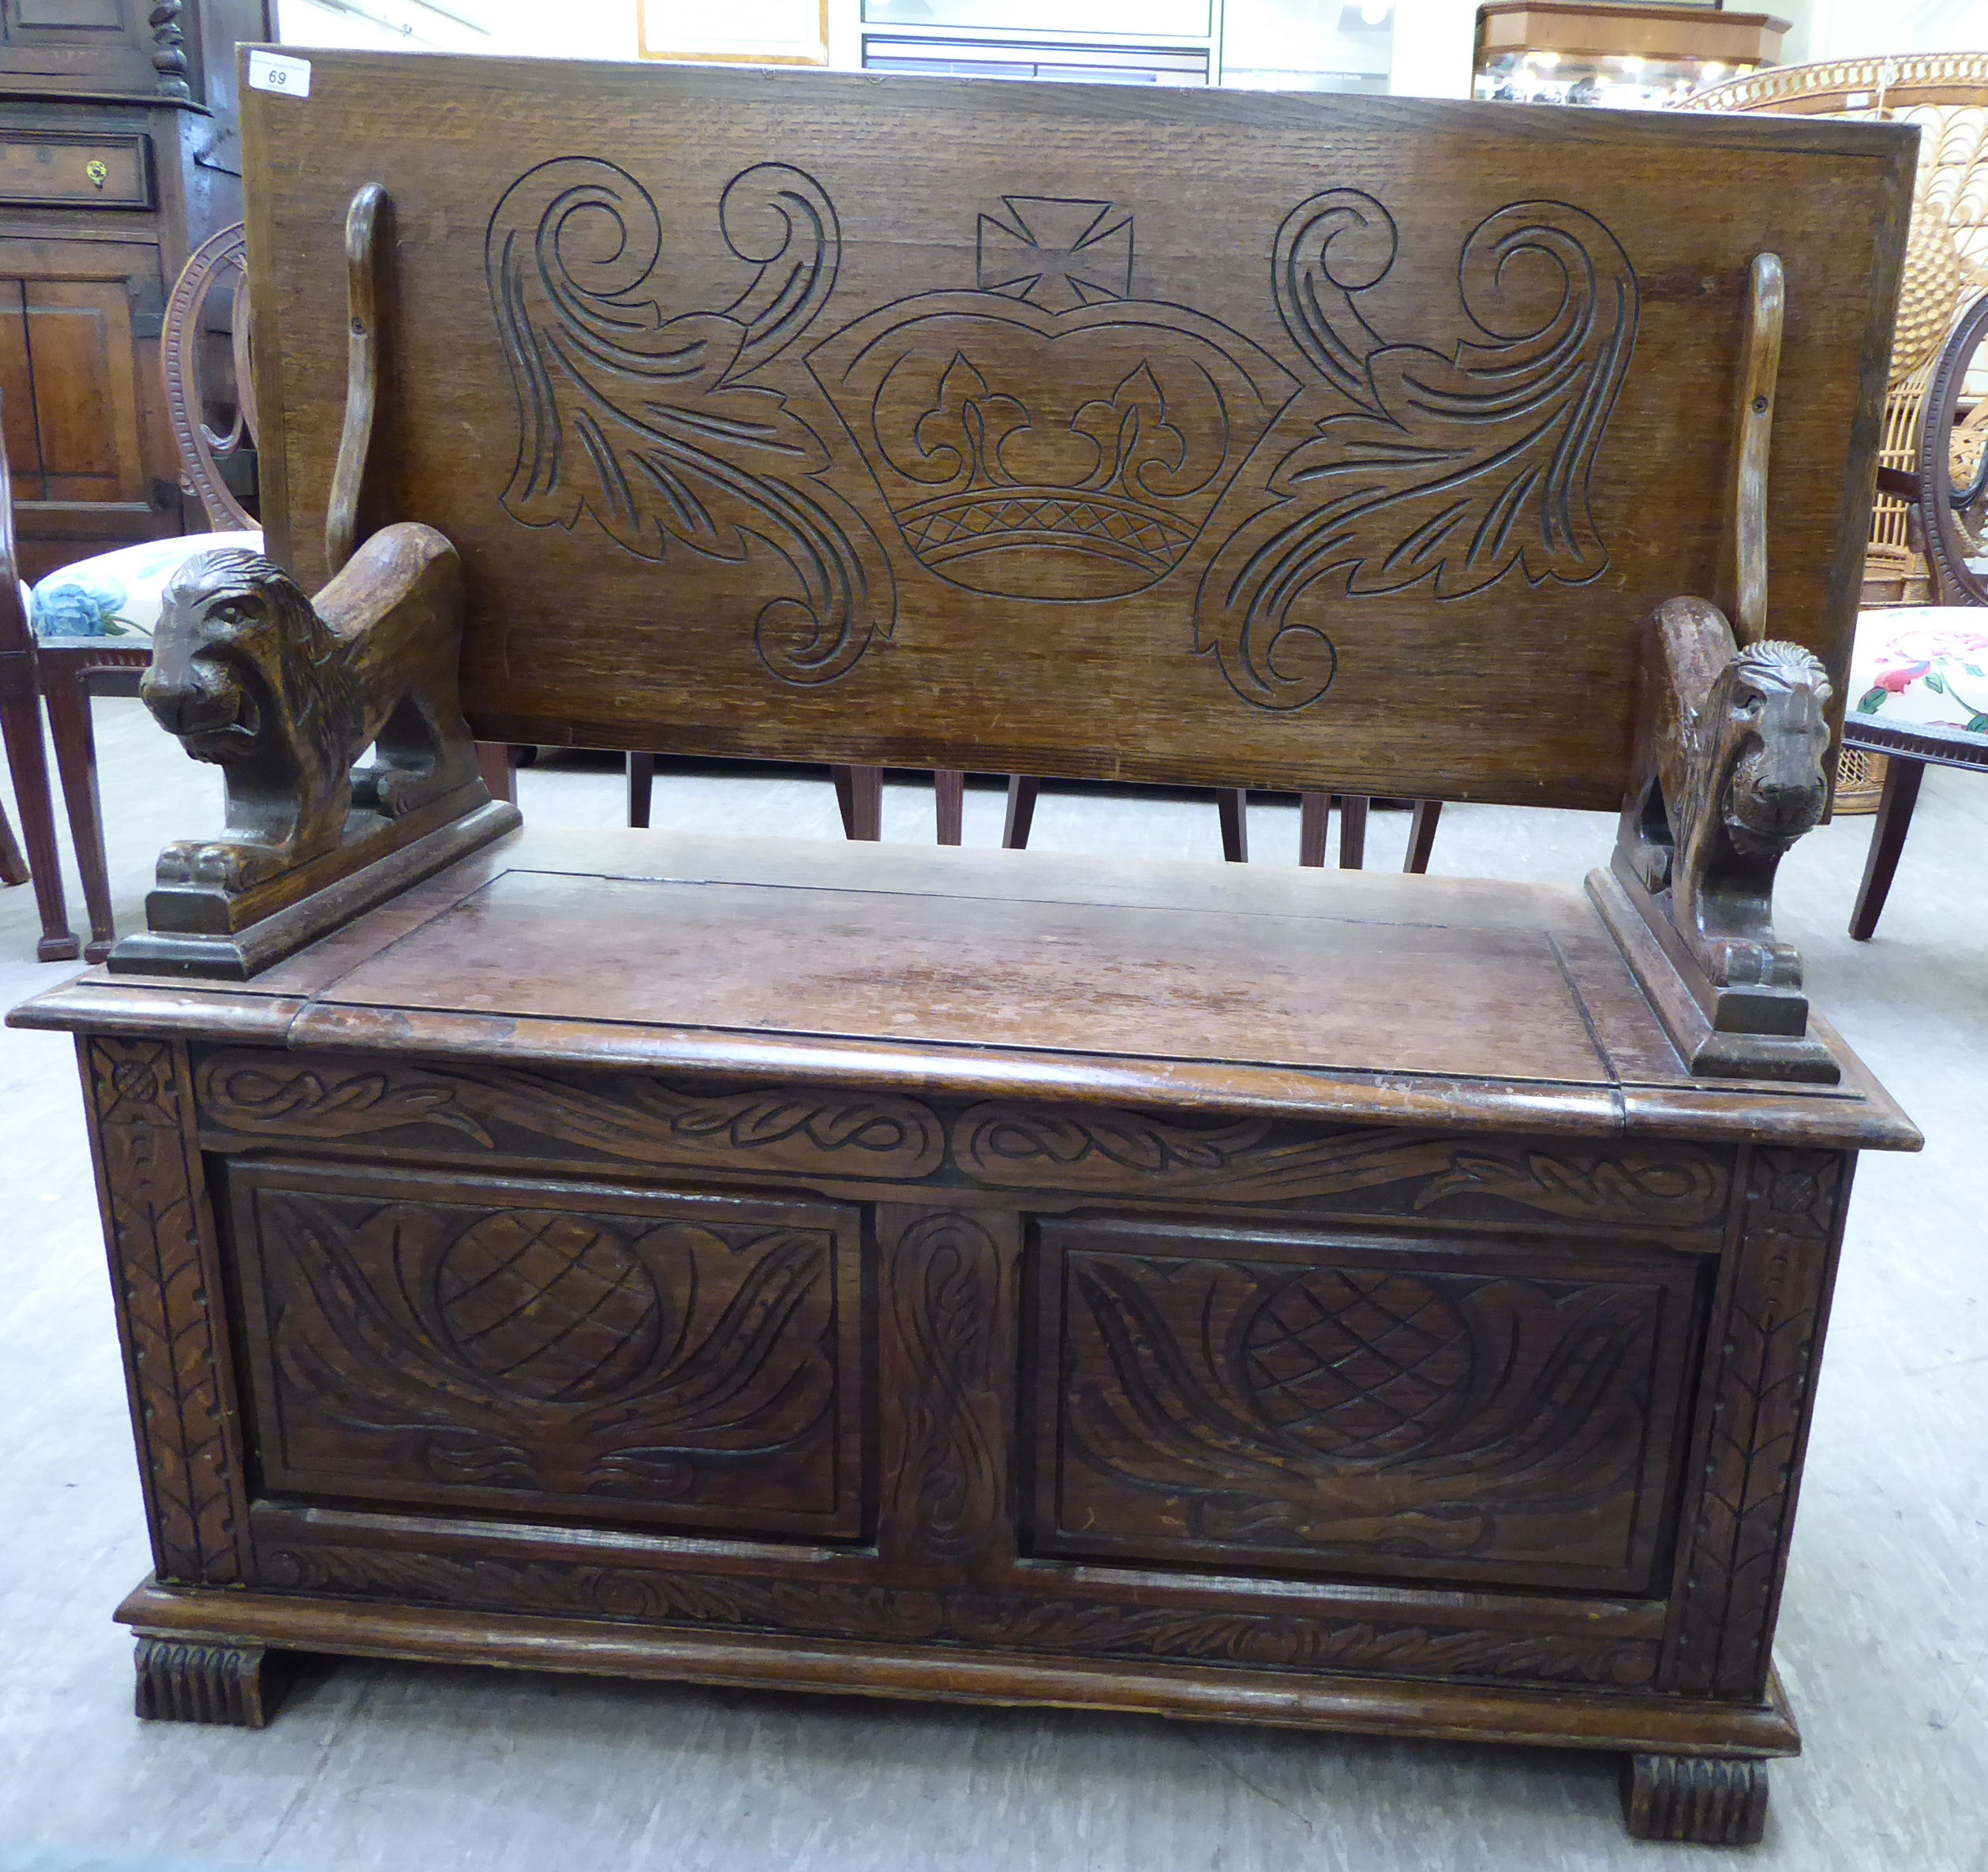 A 1920s/30s oak monk's bench with lion carved arms and a hinged seat,